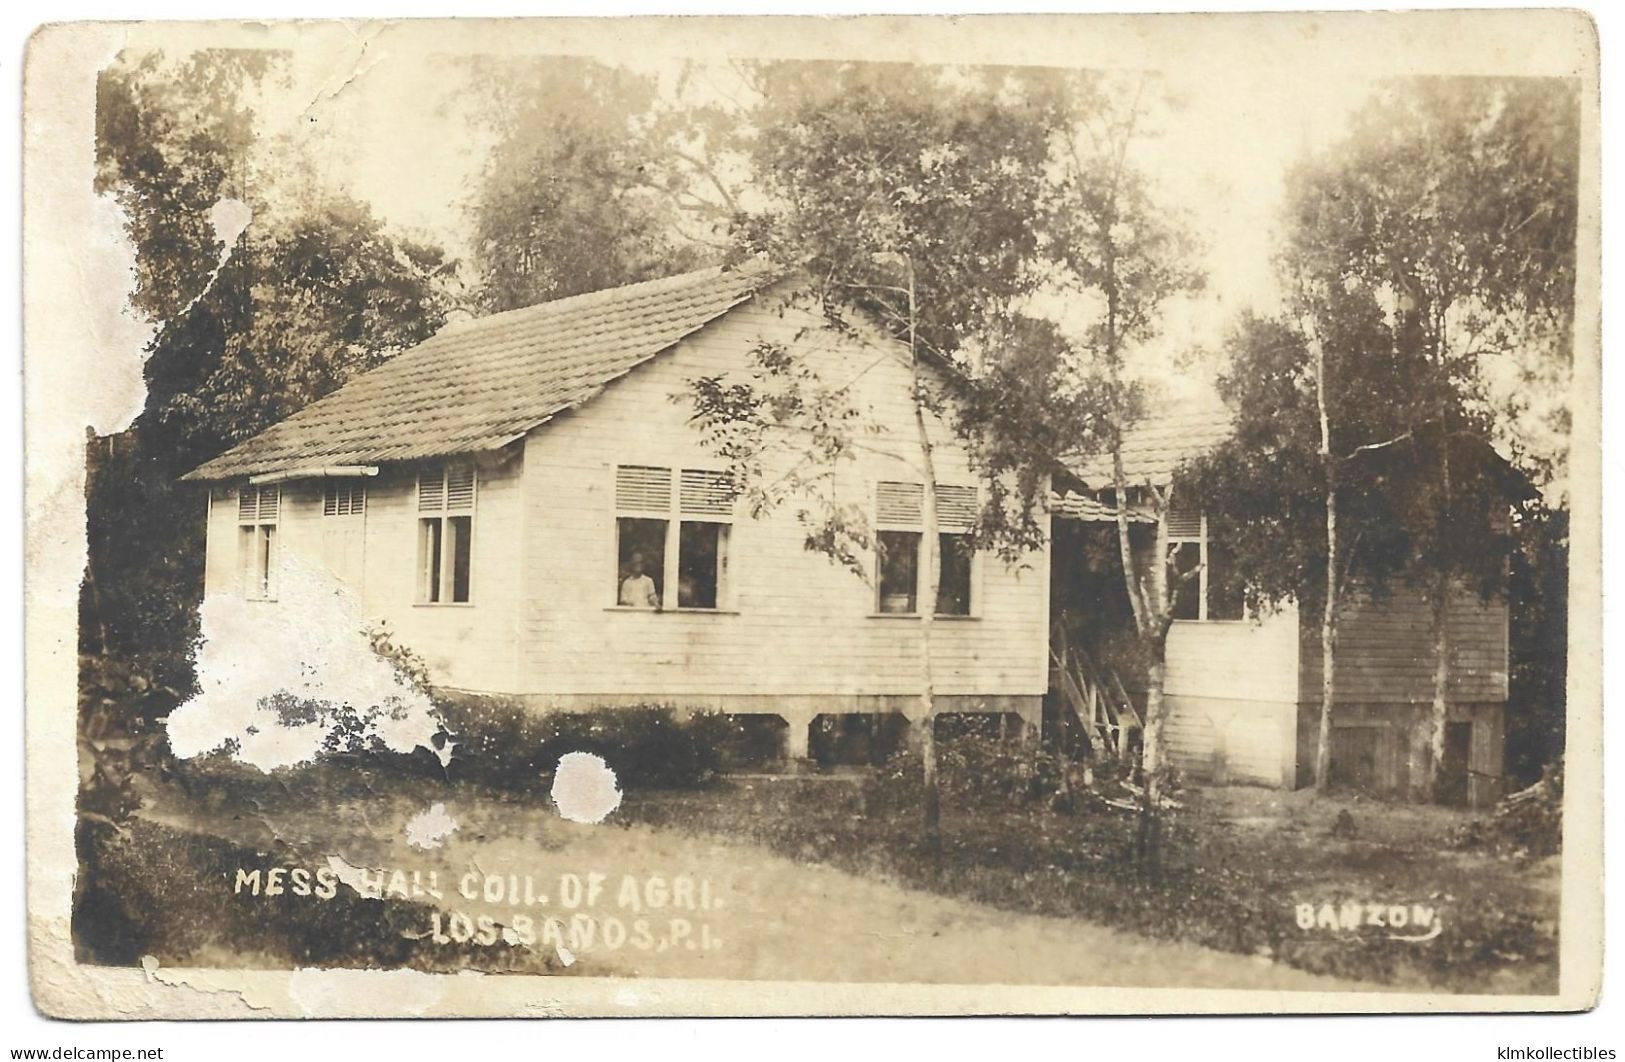 PHILIPPINES - LOS BANOS LAGUNA - MESS HALL COLLEGE OF AGRICULTURE - REAL PHOTO RPPC - Philippines